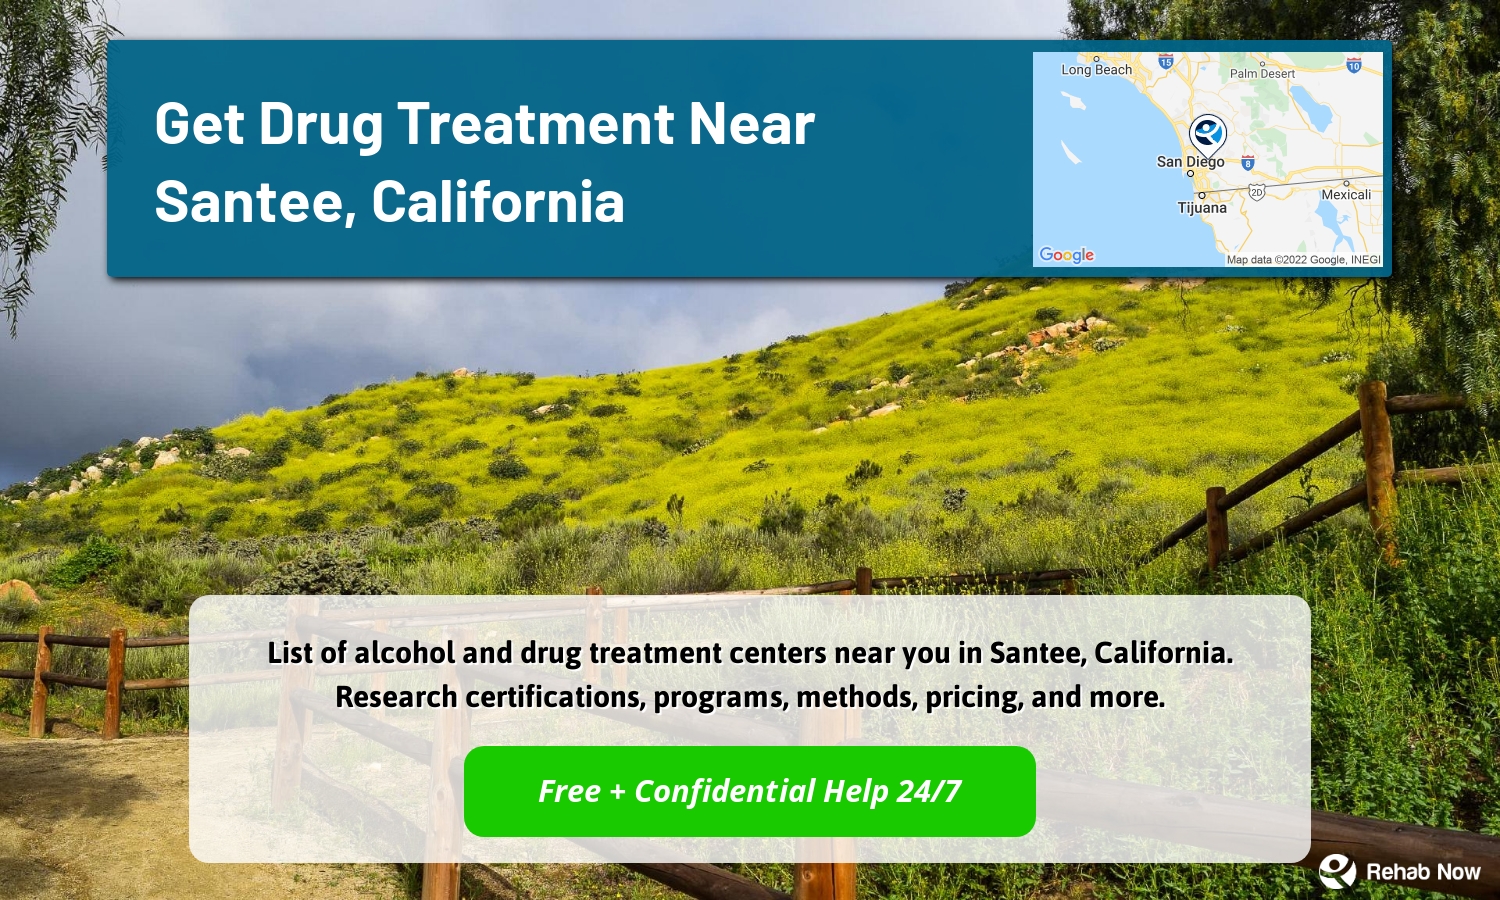 List of alcohol and drug treatment centers near you in Santee, California. Research certifications, programs, methods, pricing, and more.